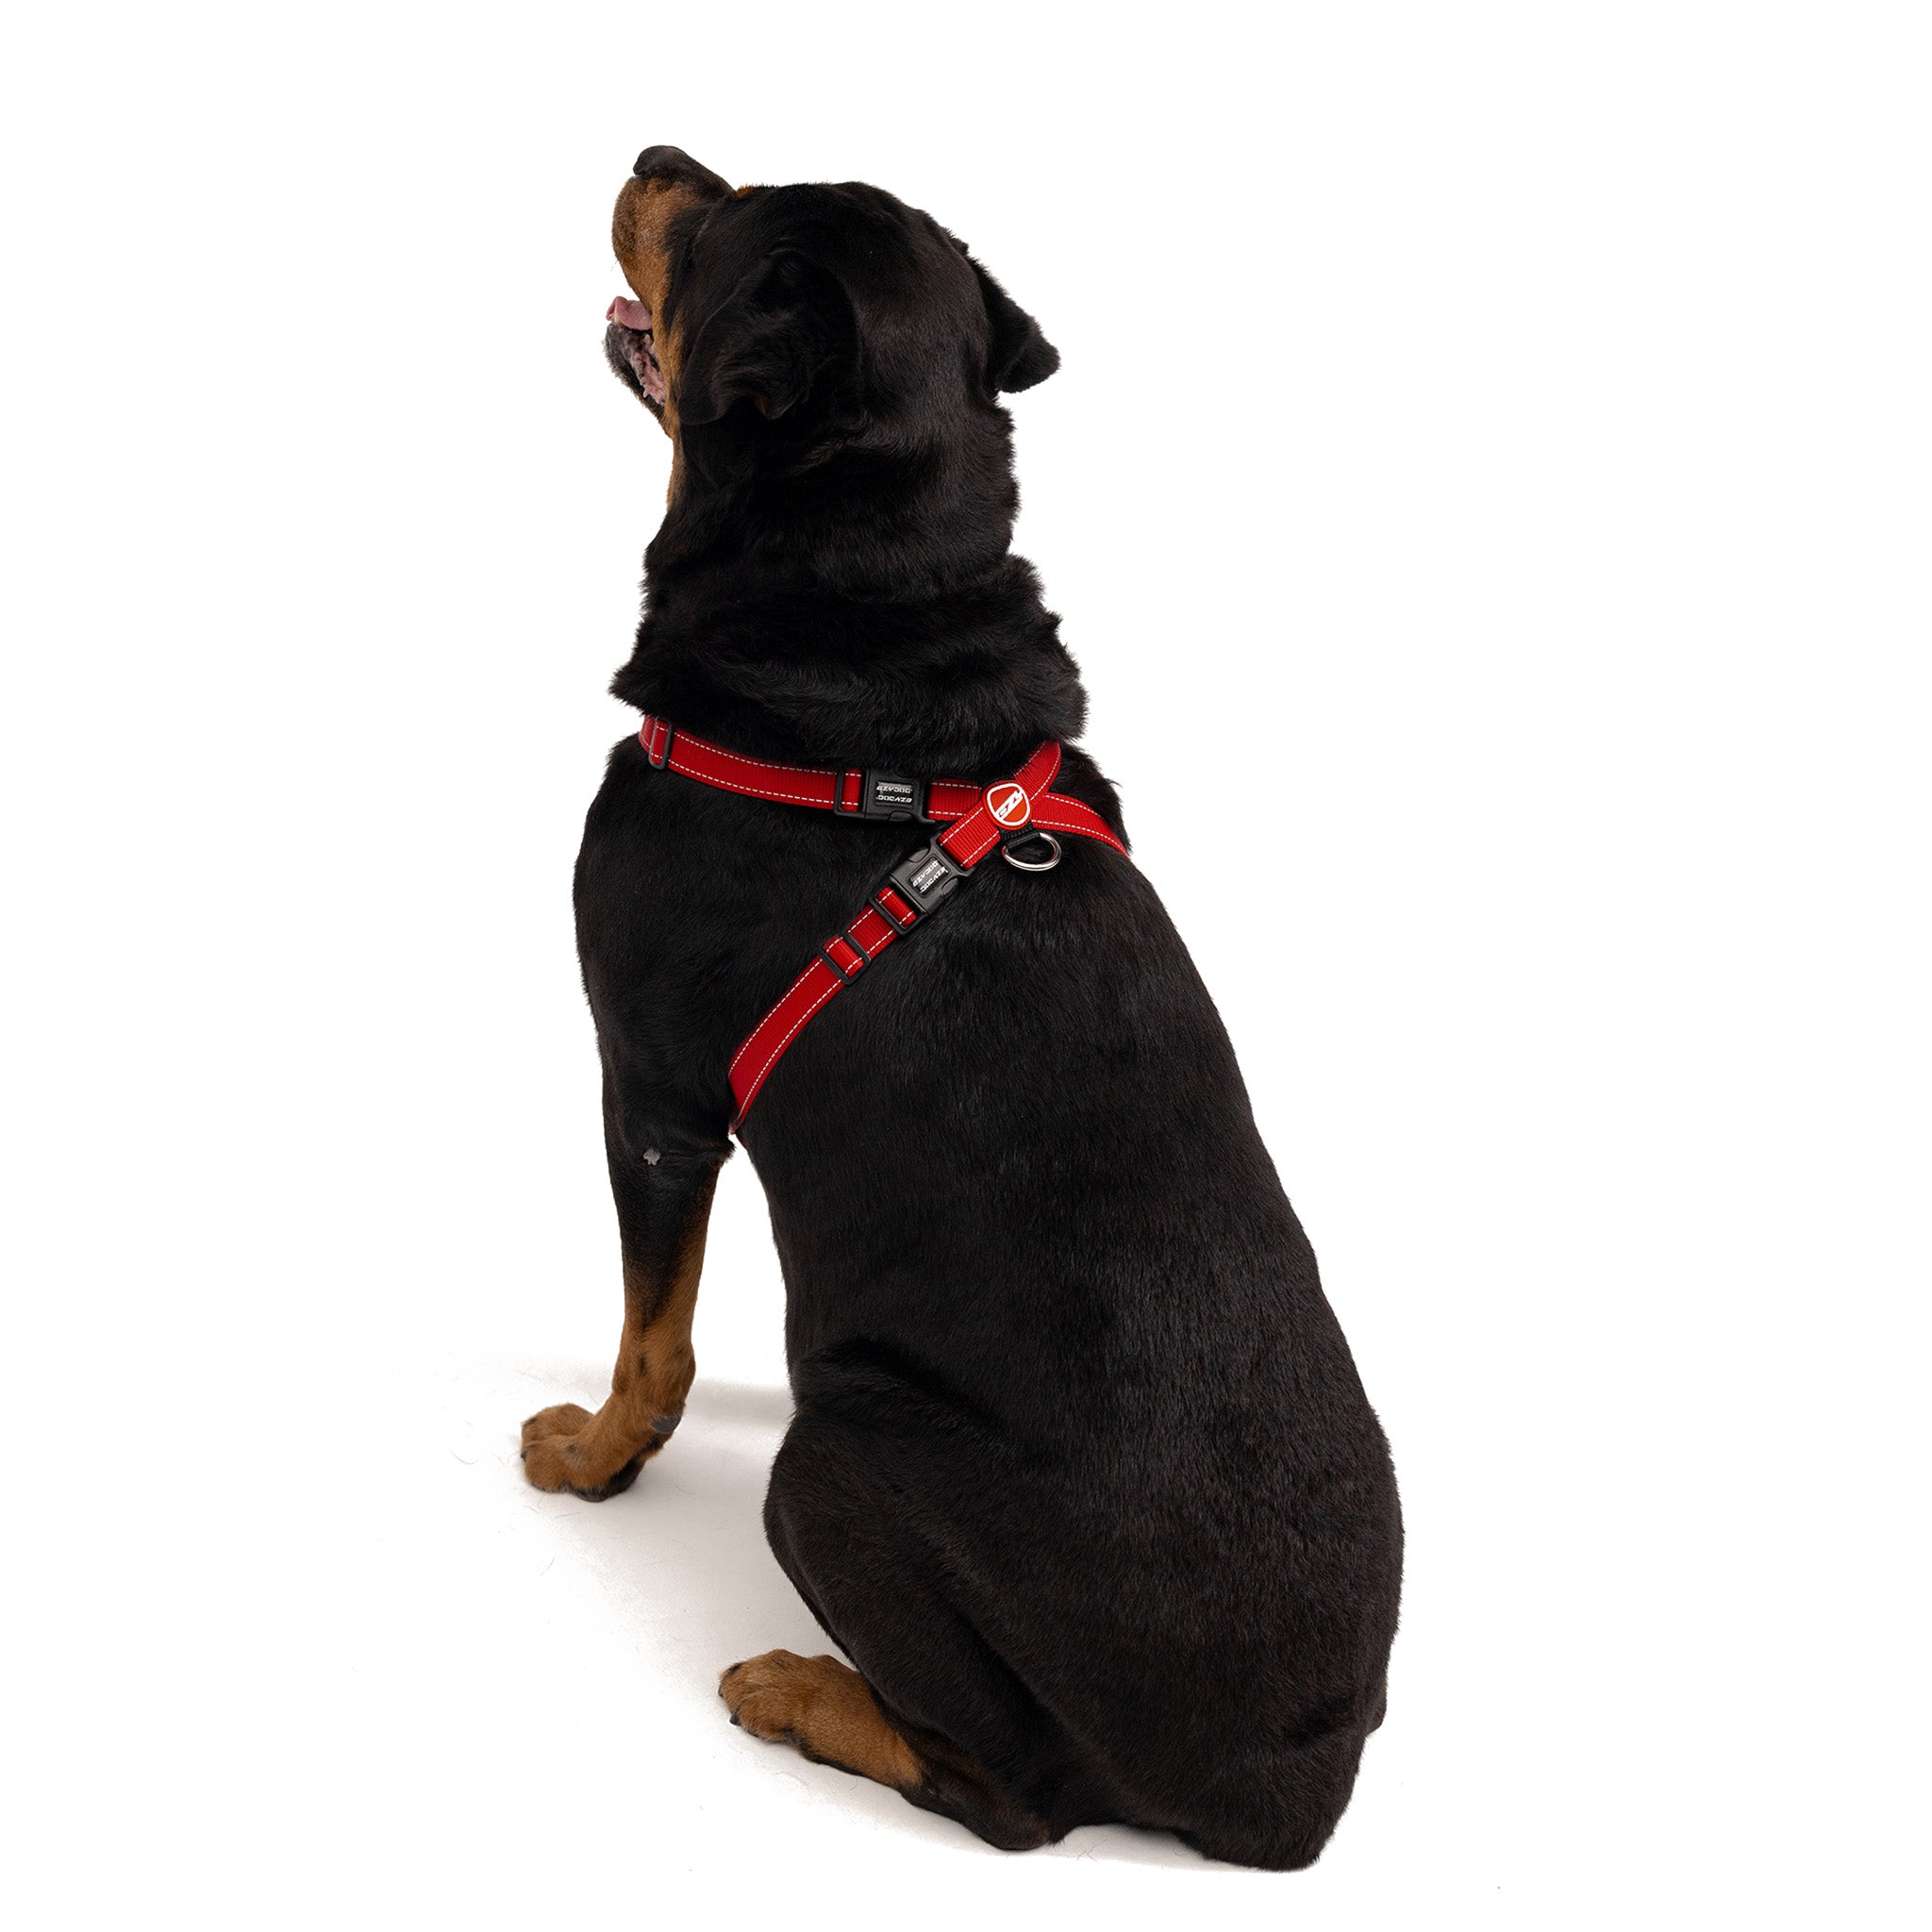 Chest Plate Harness - Corduroy